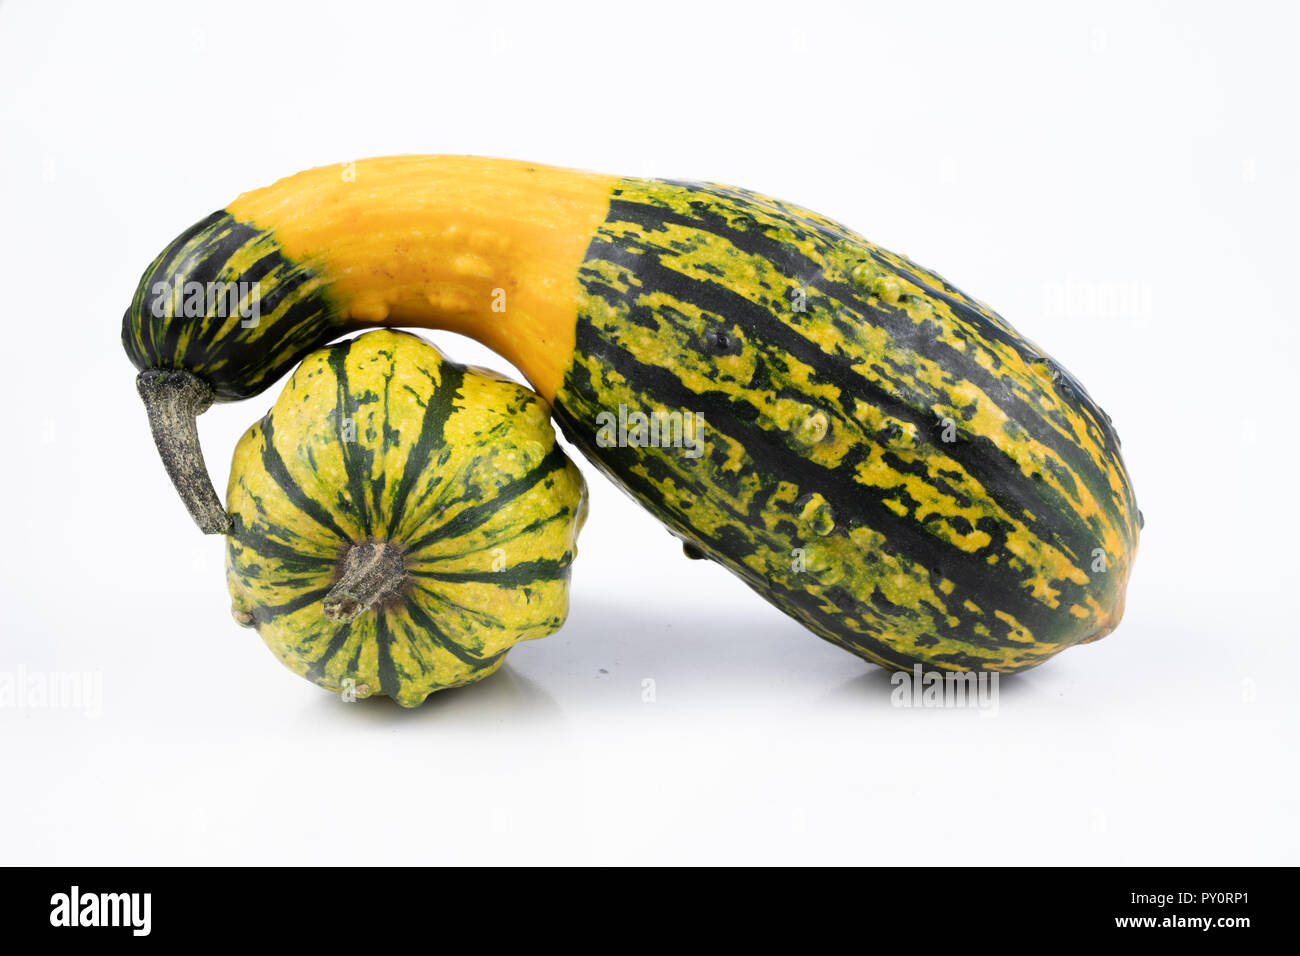 Decorative pumpkin on a white kitchen table. Fruit for halloween for decorations. Autumn background. Stock Photo